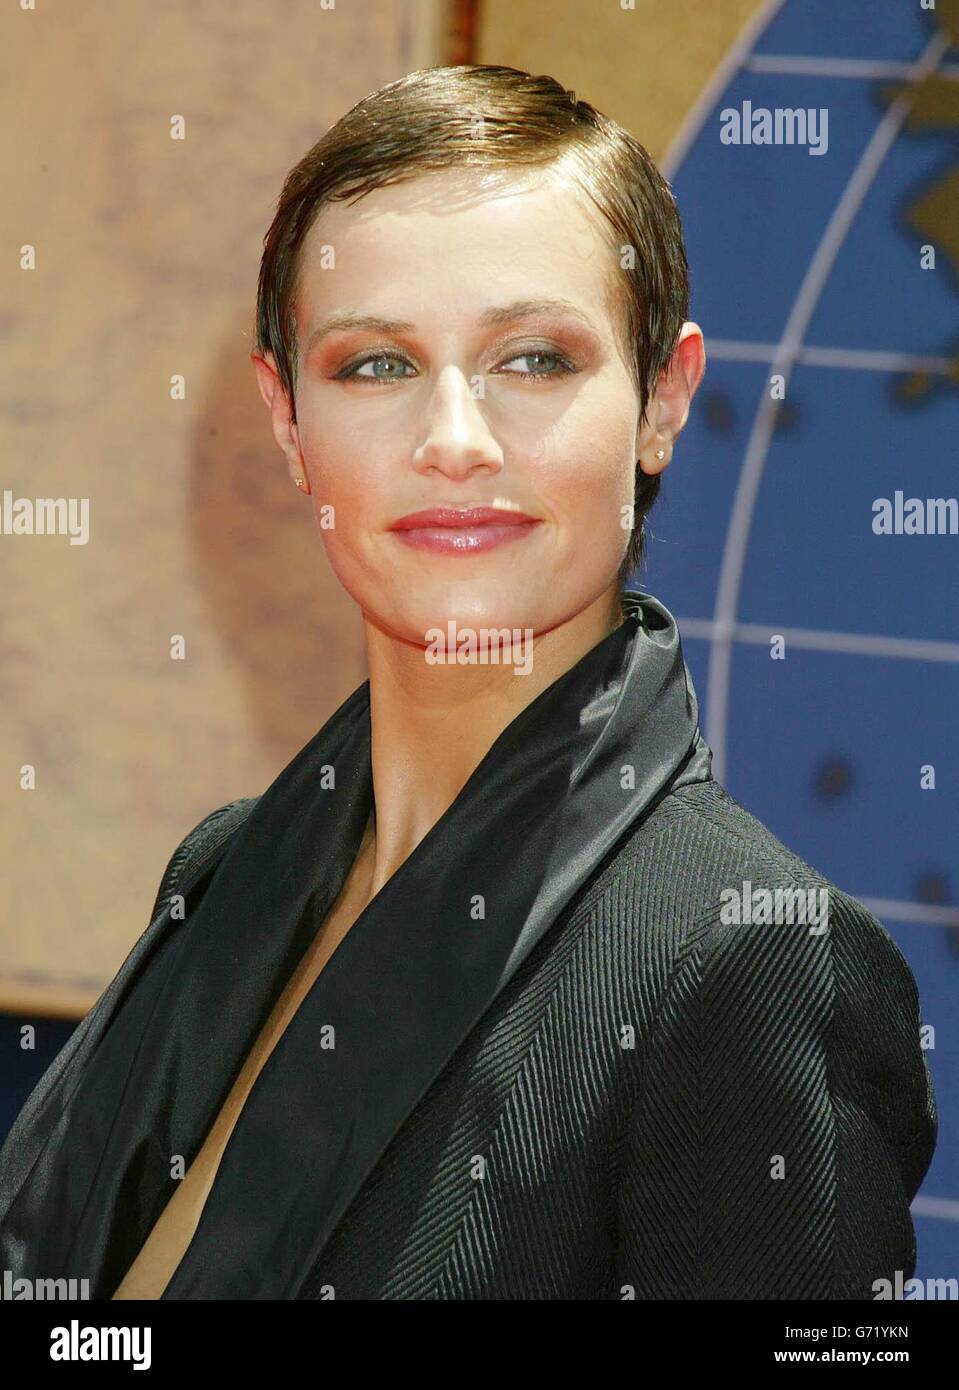 Cast member Cecile de France arrives for the premiere of her latest film Around the World in 80 Days, held at the El Capitan theatre, Los Angeles, California, USA. Stock Photo